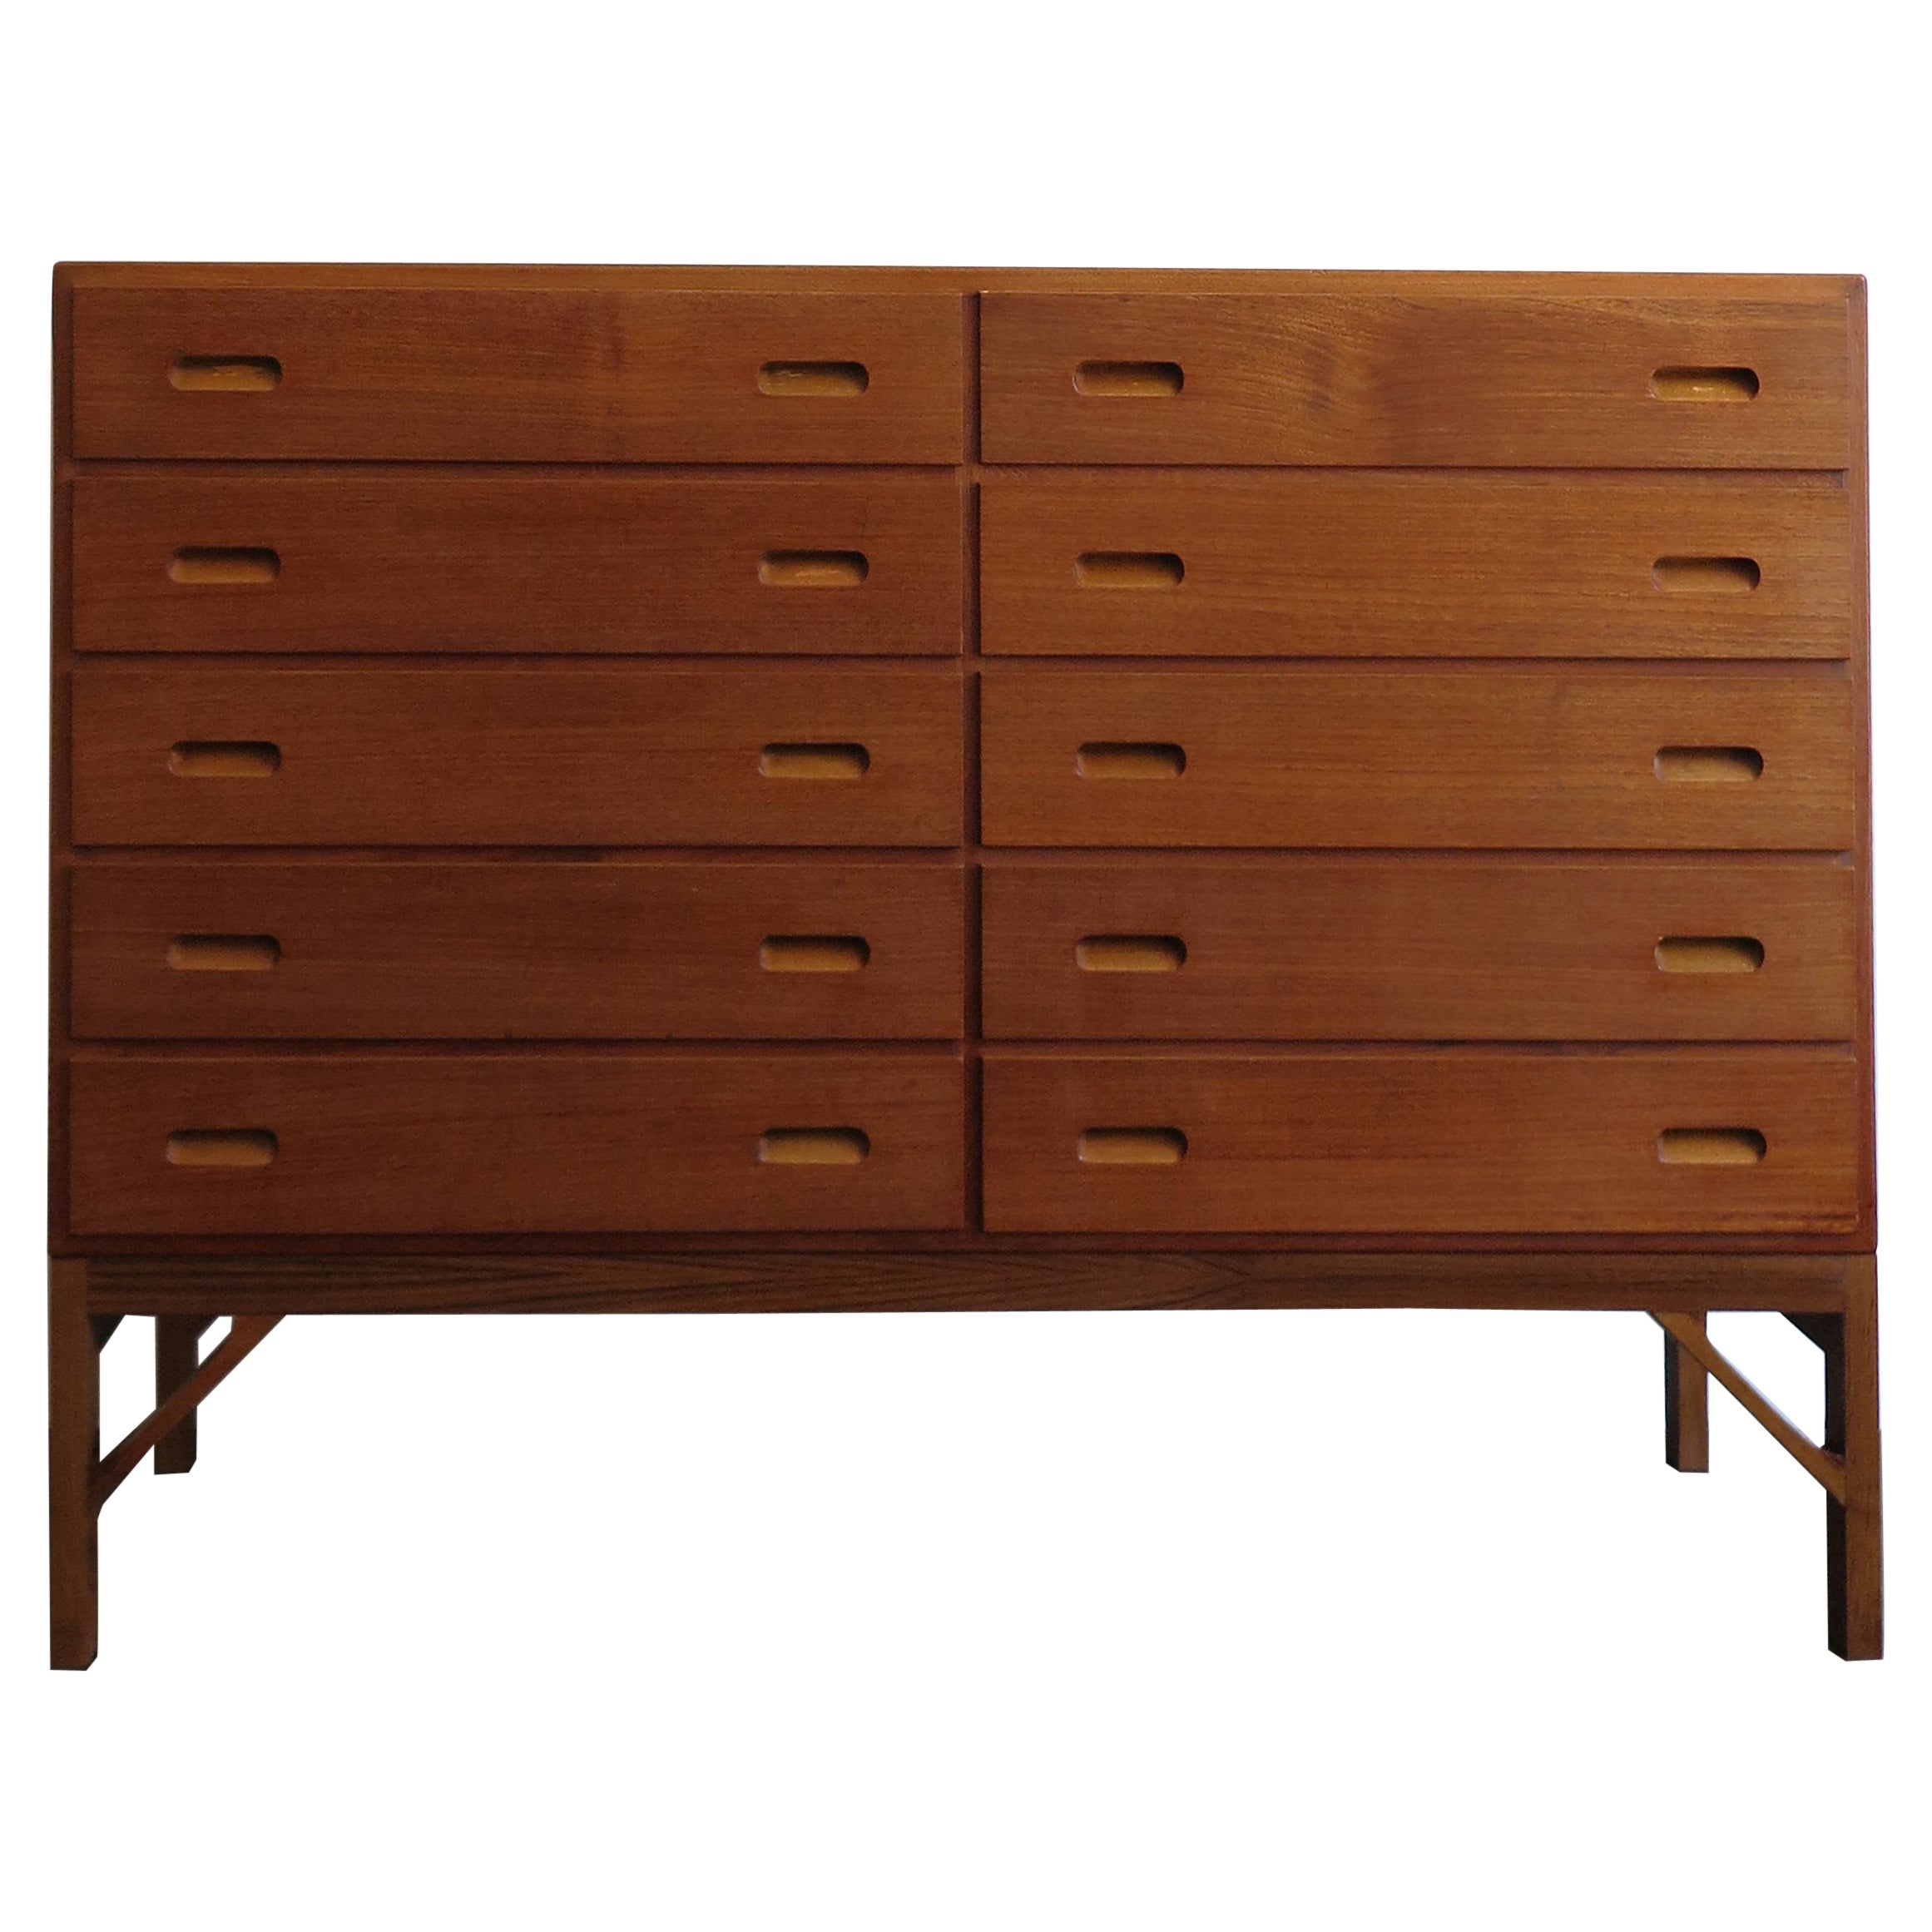 C.M. Madsen Commodes and Chests of Drawers